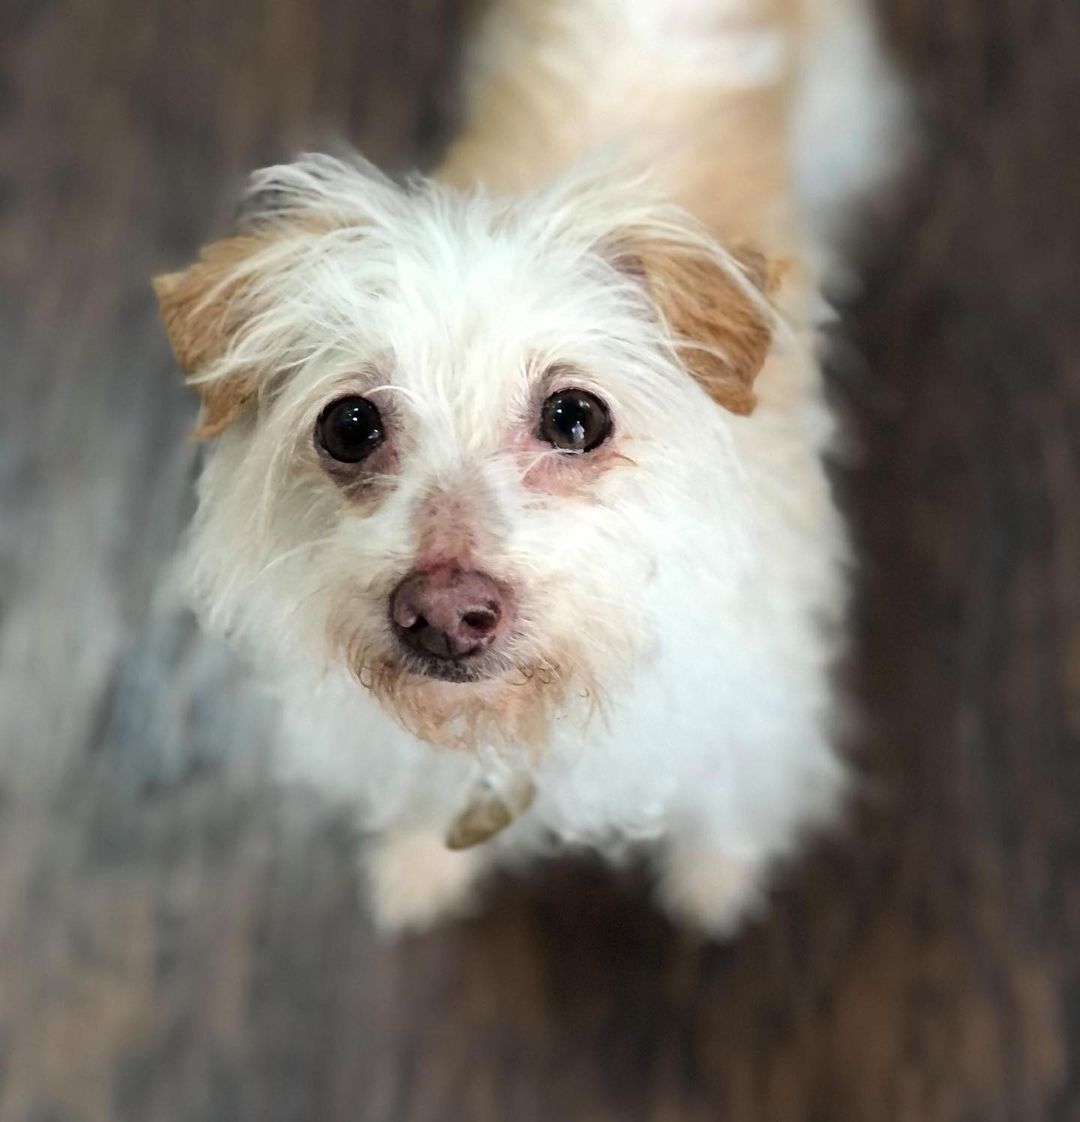 Say hi to Pickles! At 9 years old, Pickles has not slowed down. He enjoys walks around the neighborhood and has some mad hops. Just when you think he is too tiny to jump up on the bed, just give him a minute to calculate the jump and he will be up snuggling you in no time. He embodies the phrase 